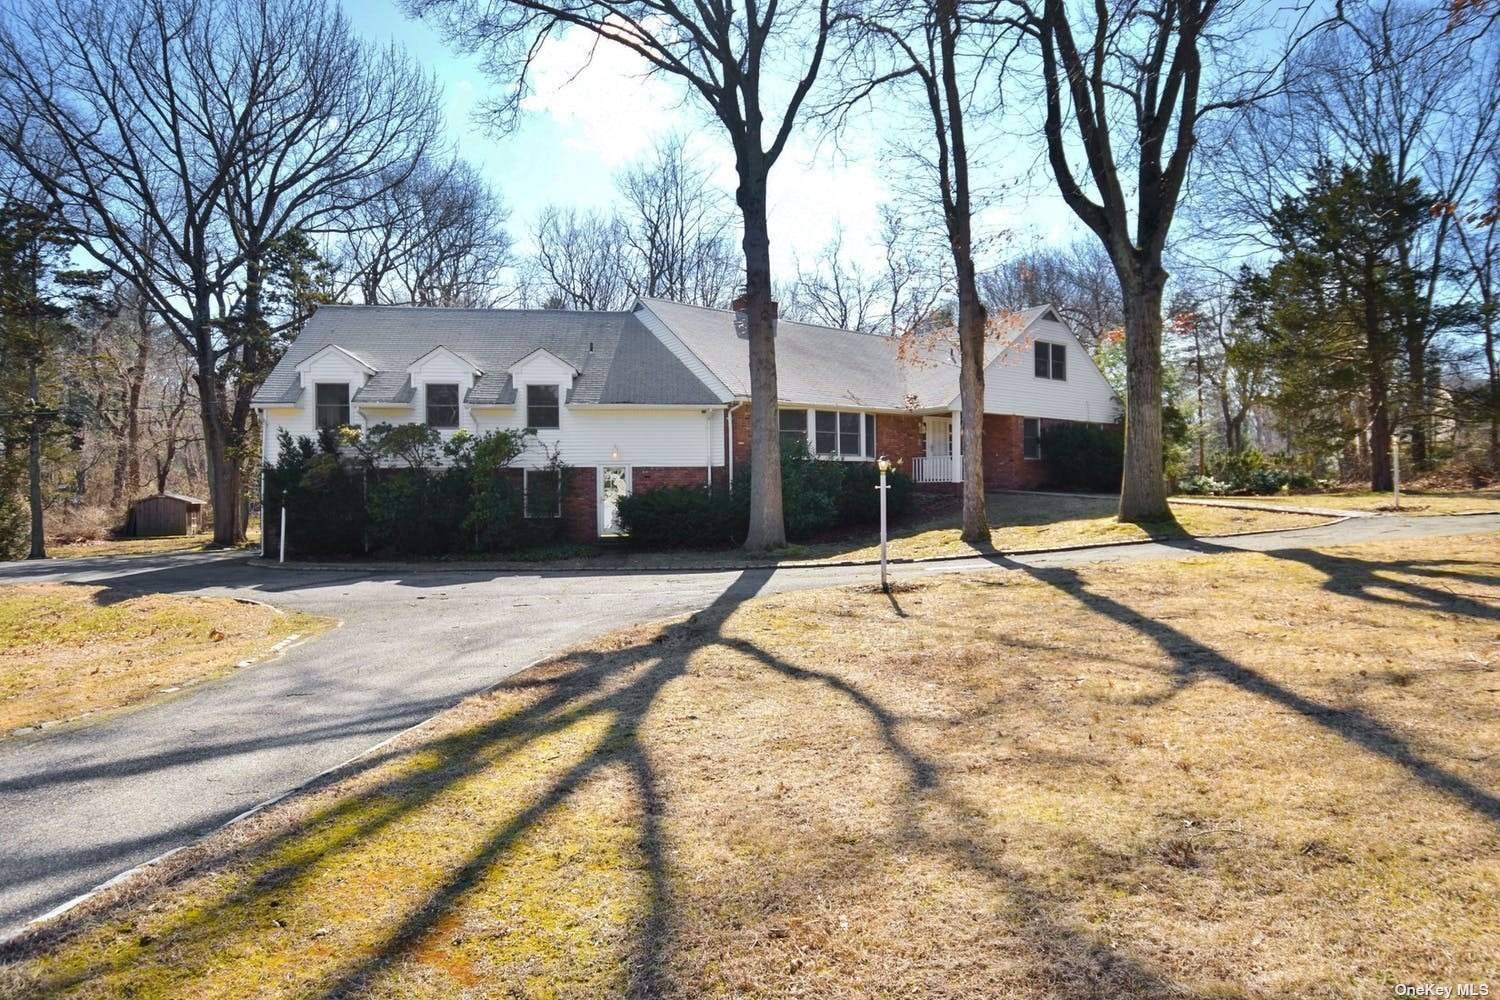 Step into this Large Home on Beautifully Private Property with Mature Trees.